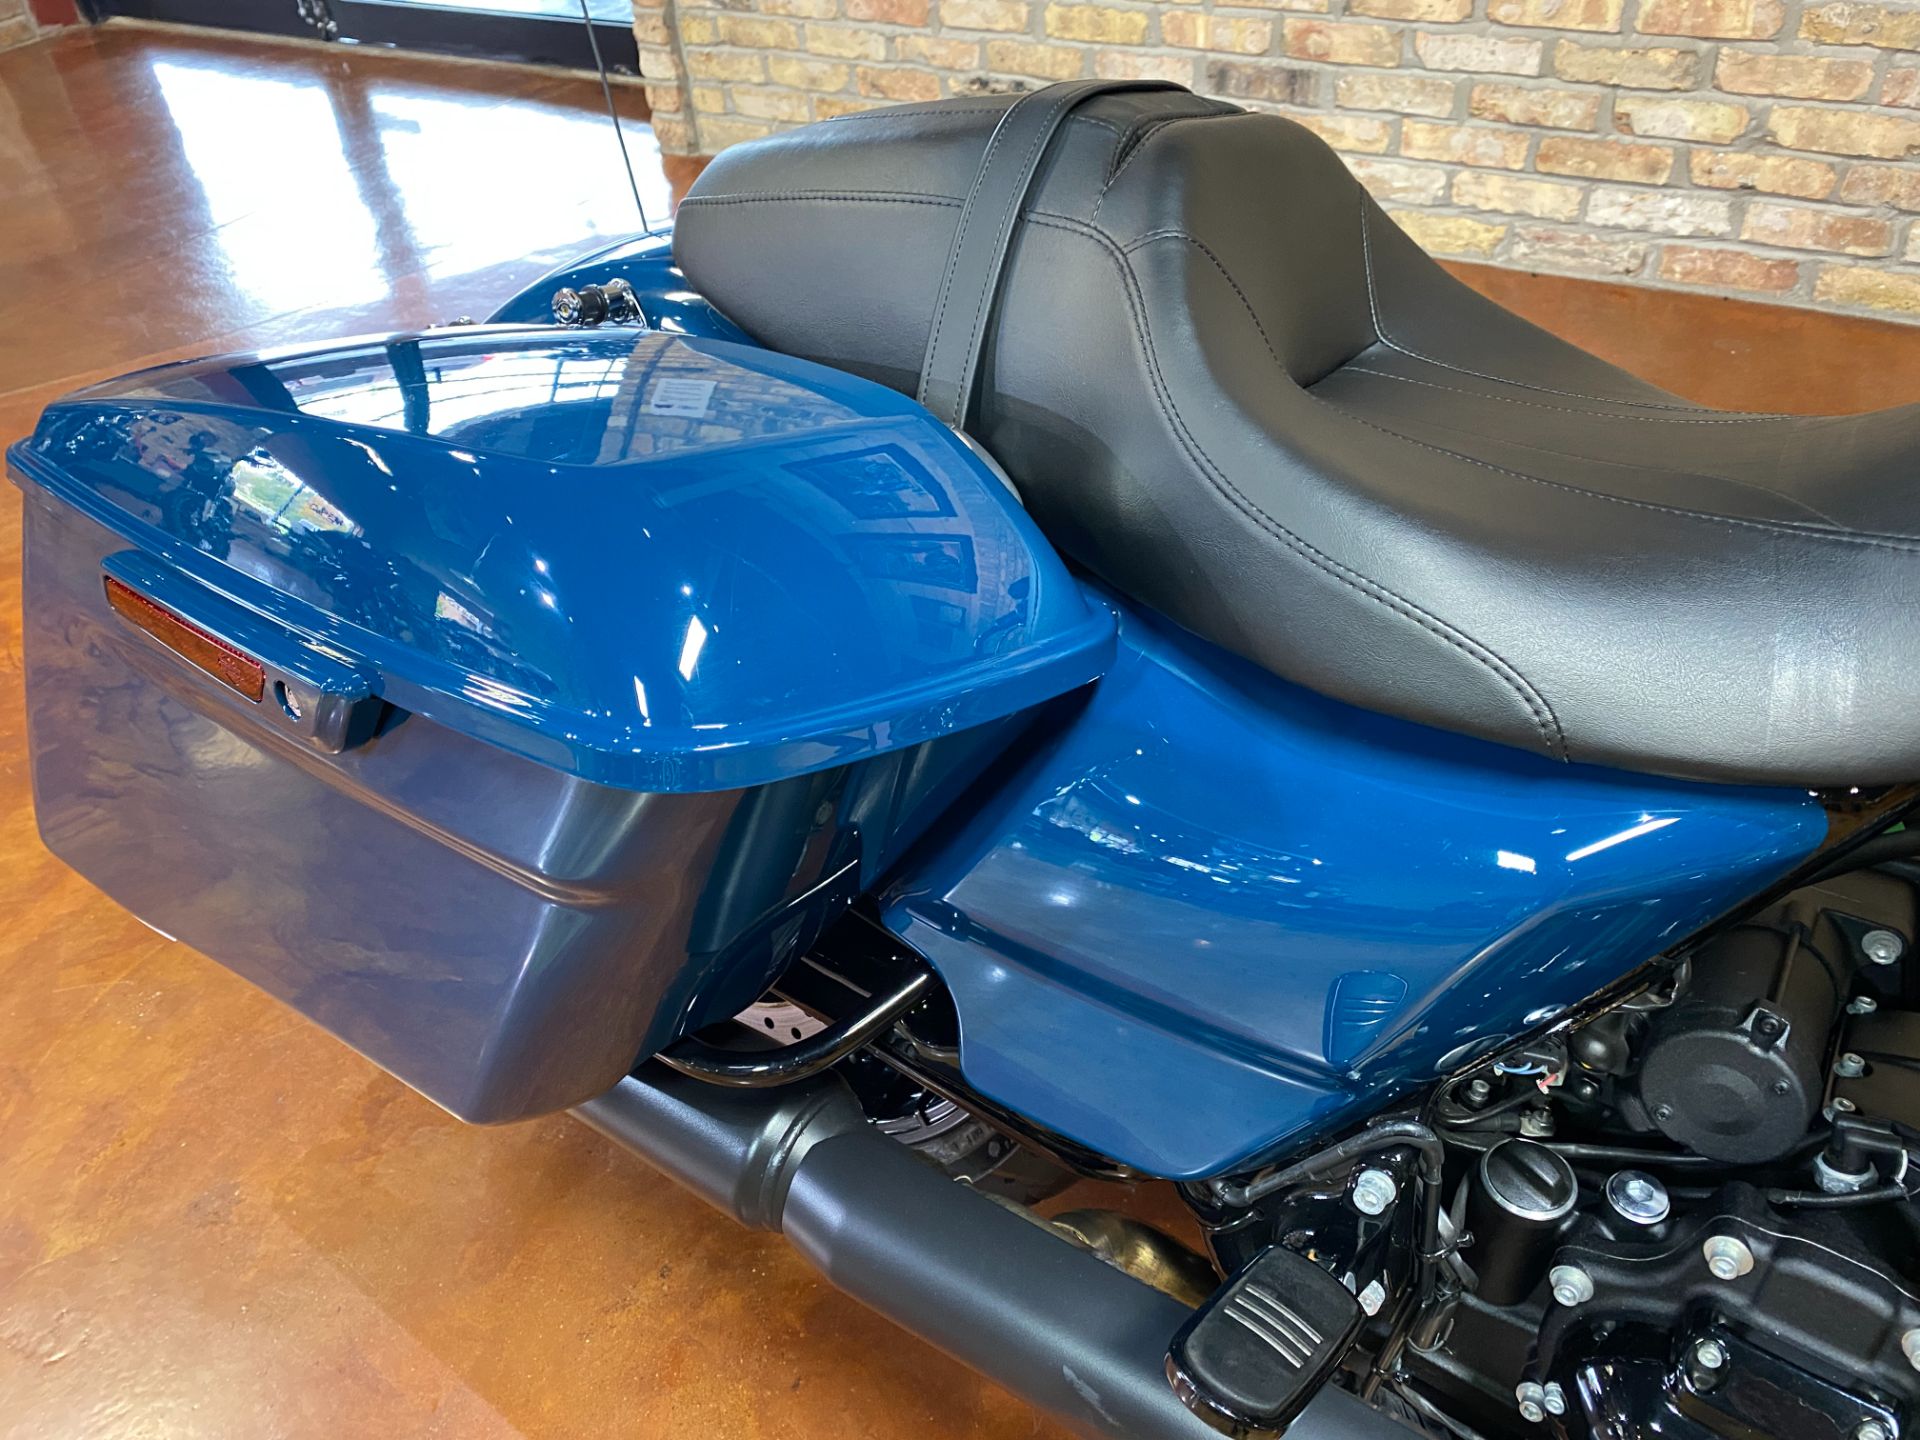 2021 Harley-Davidson Road Glide® Special in Big Bend, Wisconsin - Photo 7